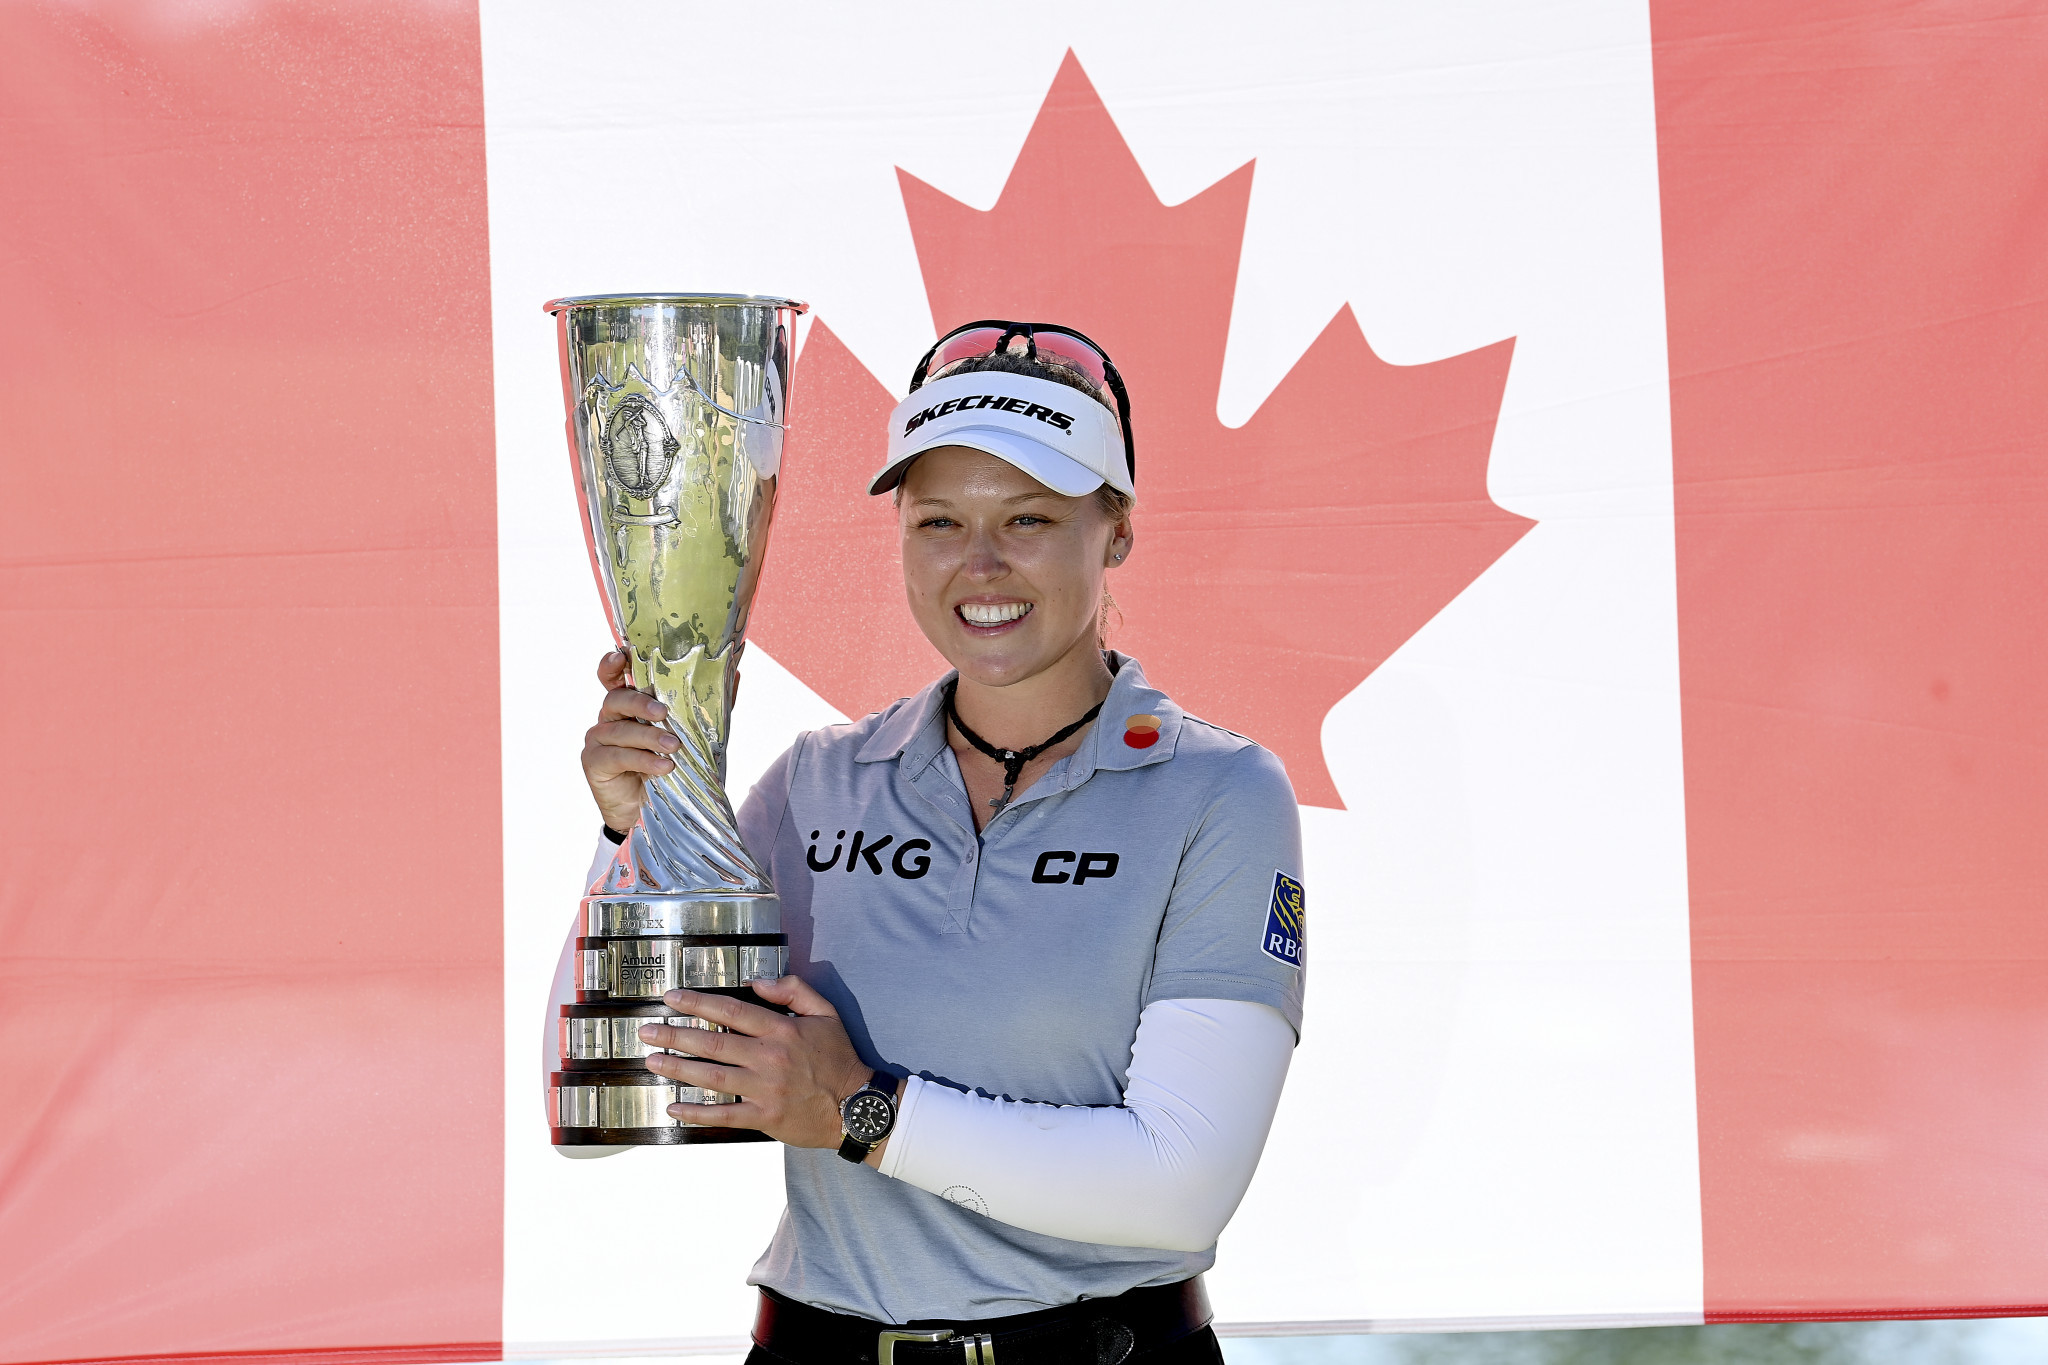 Henderson set to defend title at golf’s Evian Championship, featuring 19 of world's top 20